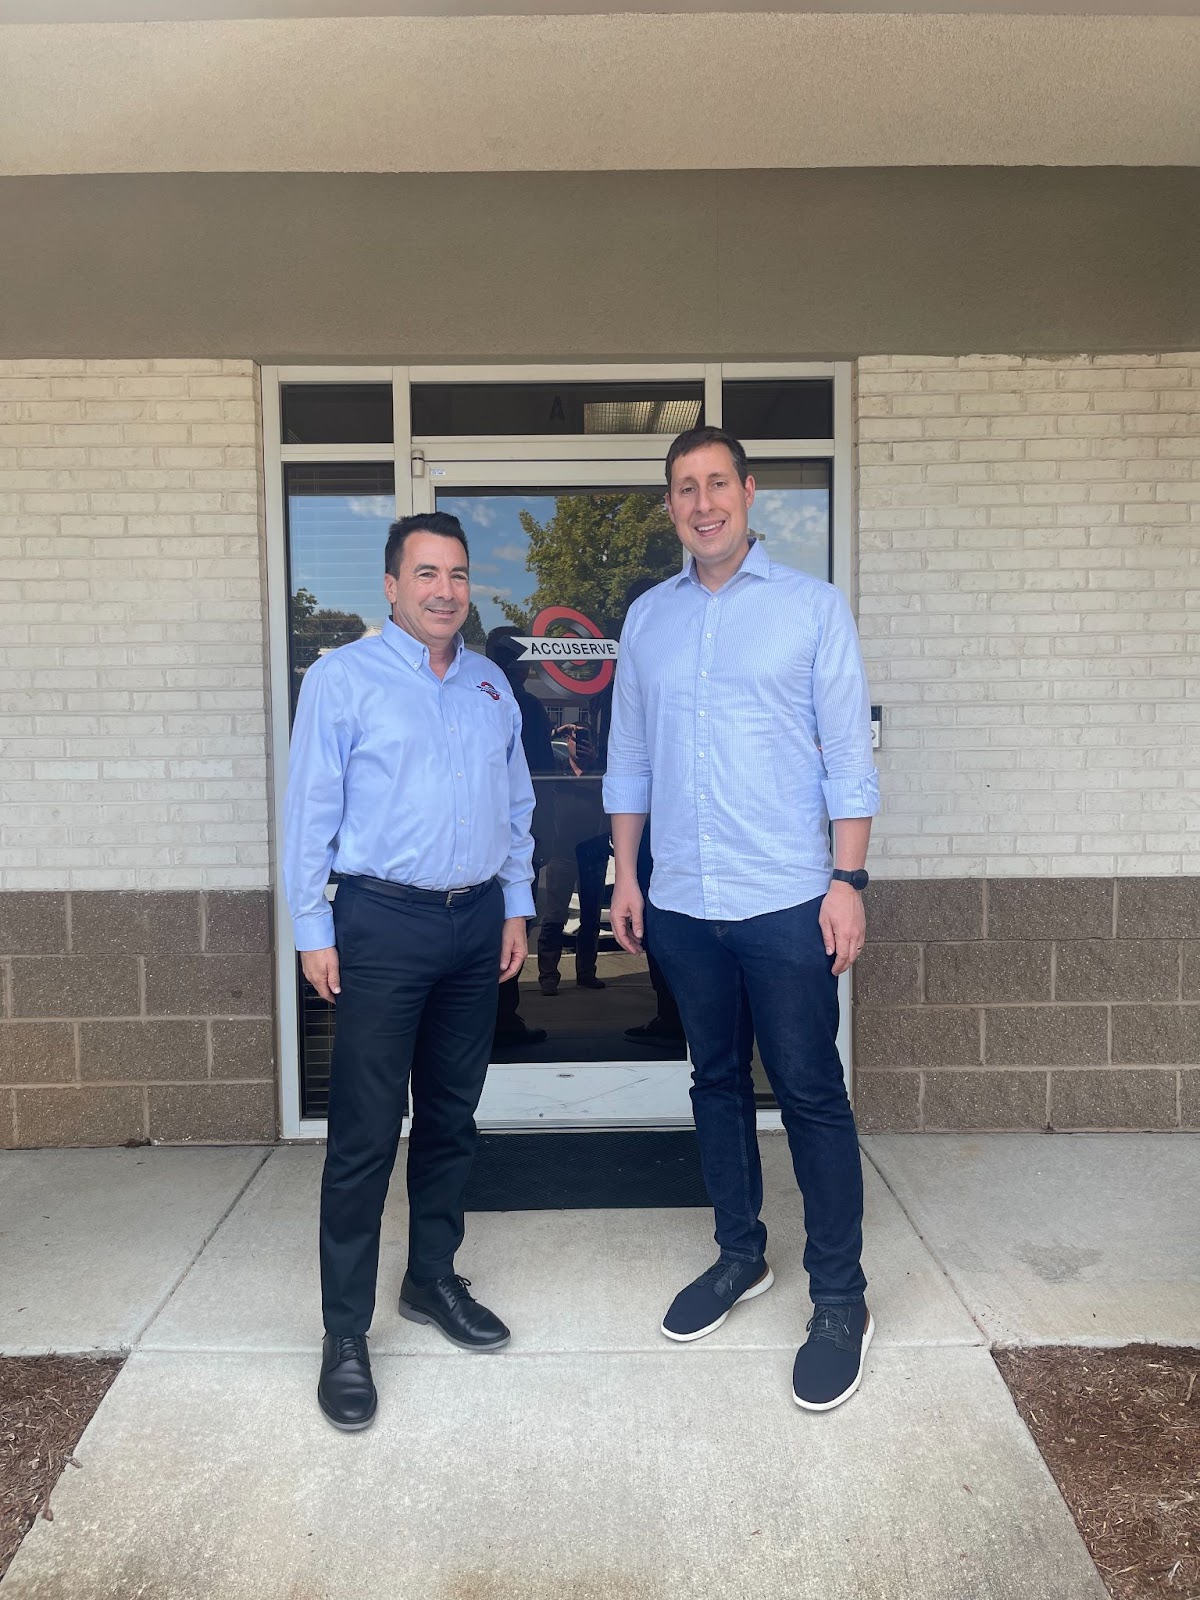 Left to right: Michael Griffith, President of Accuserve, Inc., 
and Jonathan Blanchard, CEO of ETI Precision, outside of Accuserve’s headquarters in Huntersville, NC